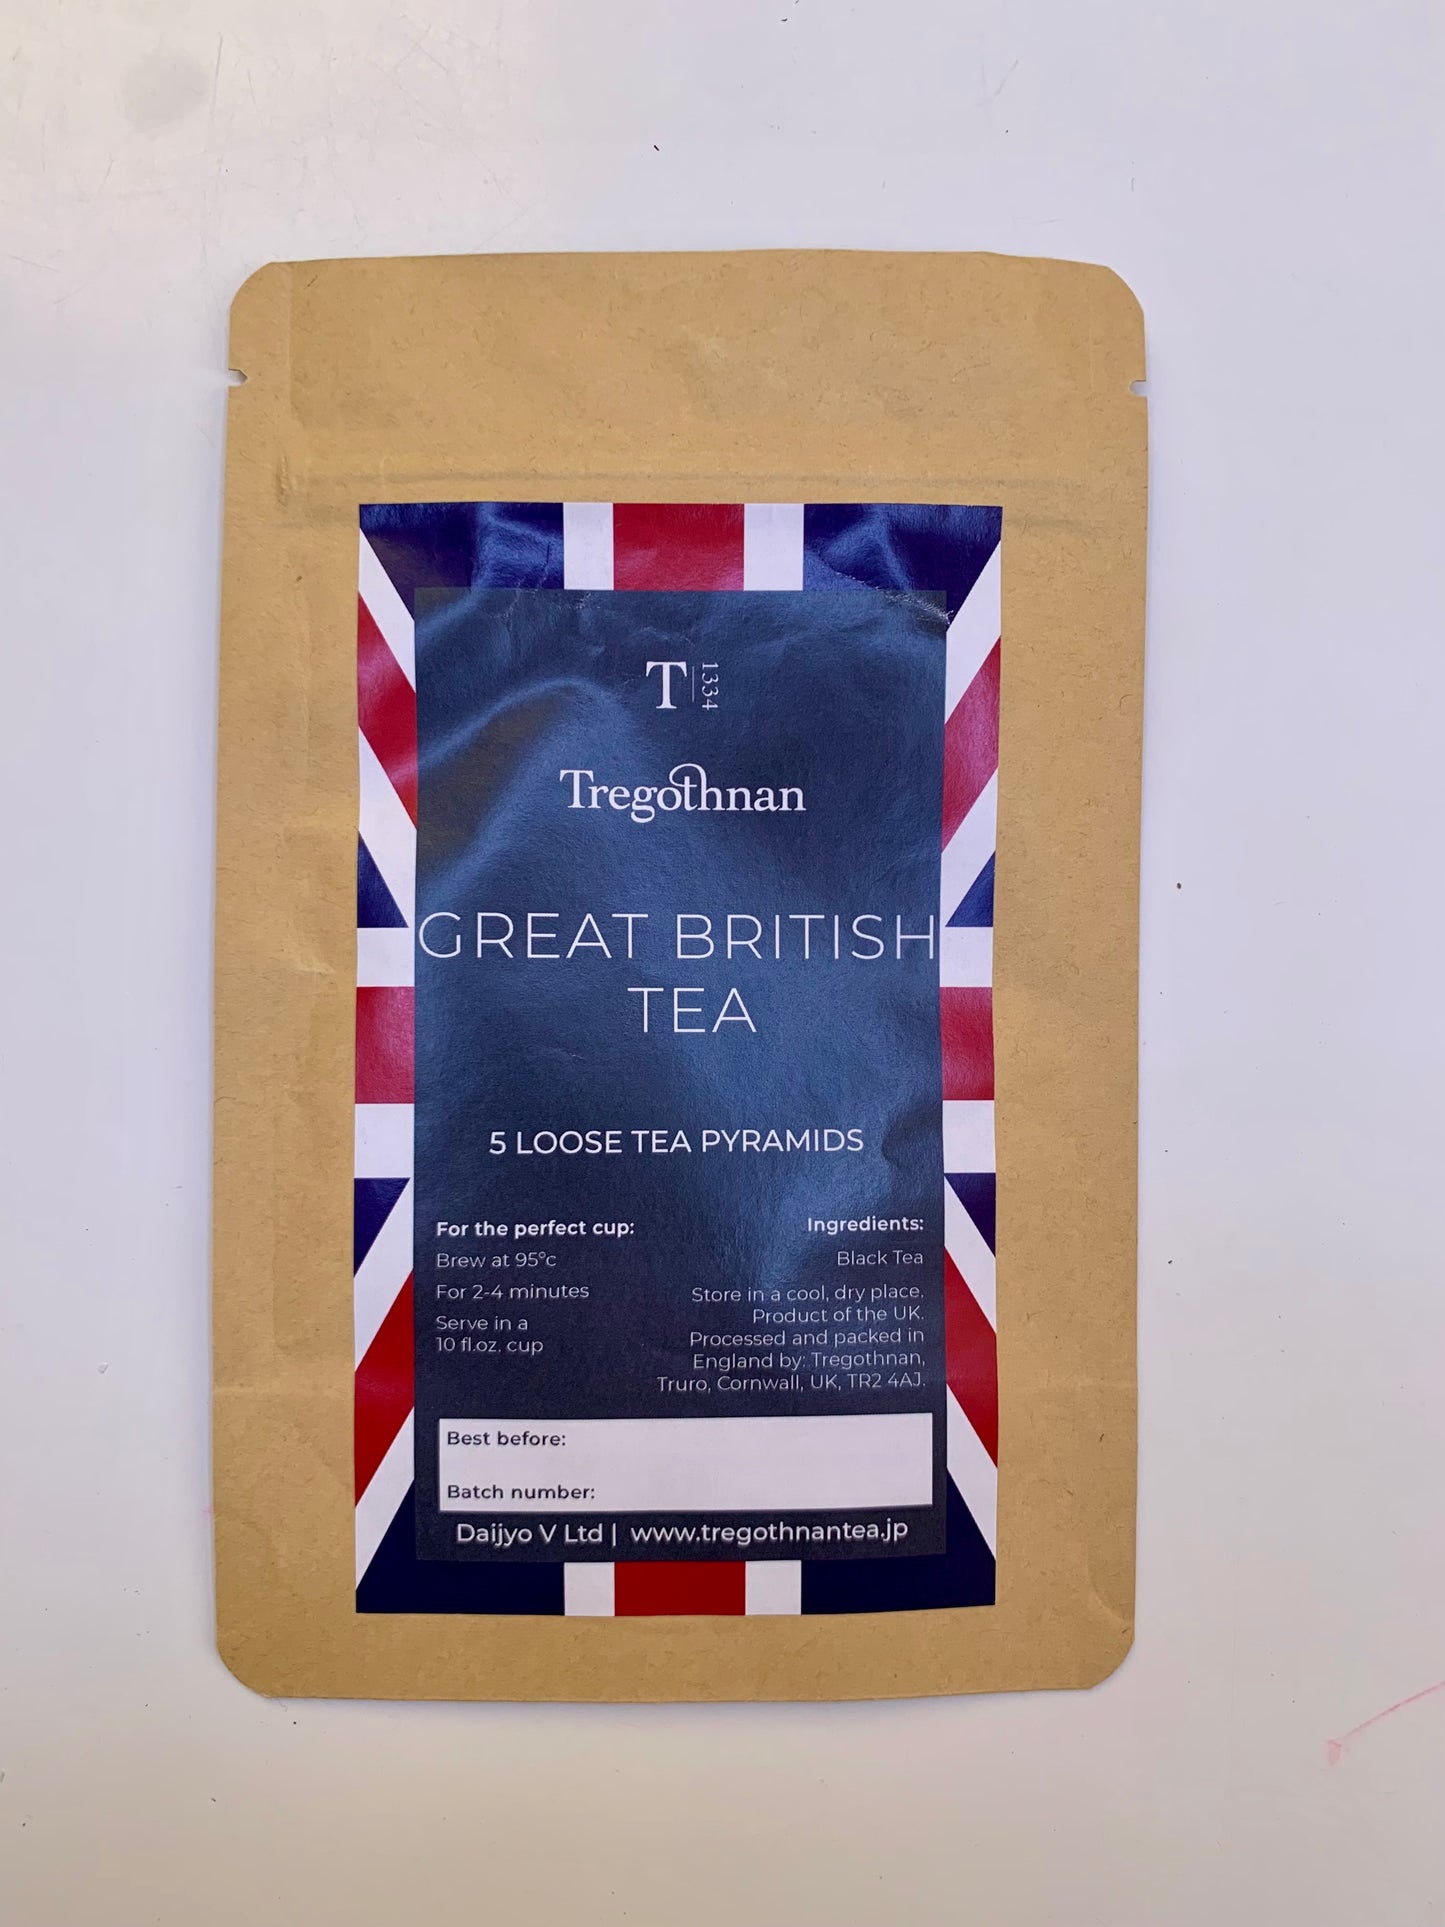 Tregothnan branded pouch with Great British Tea on a white background